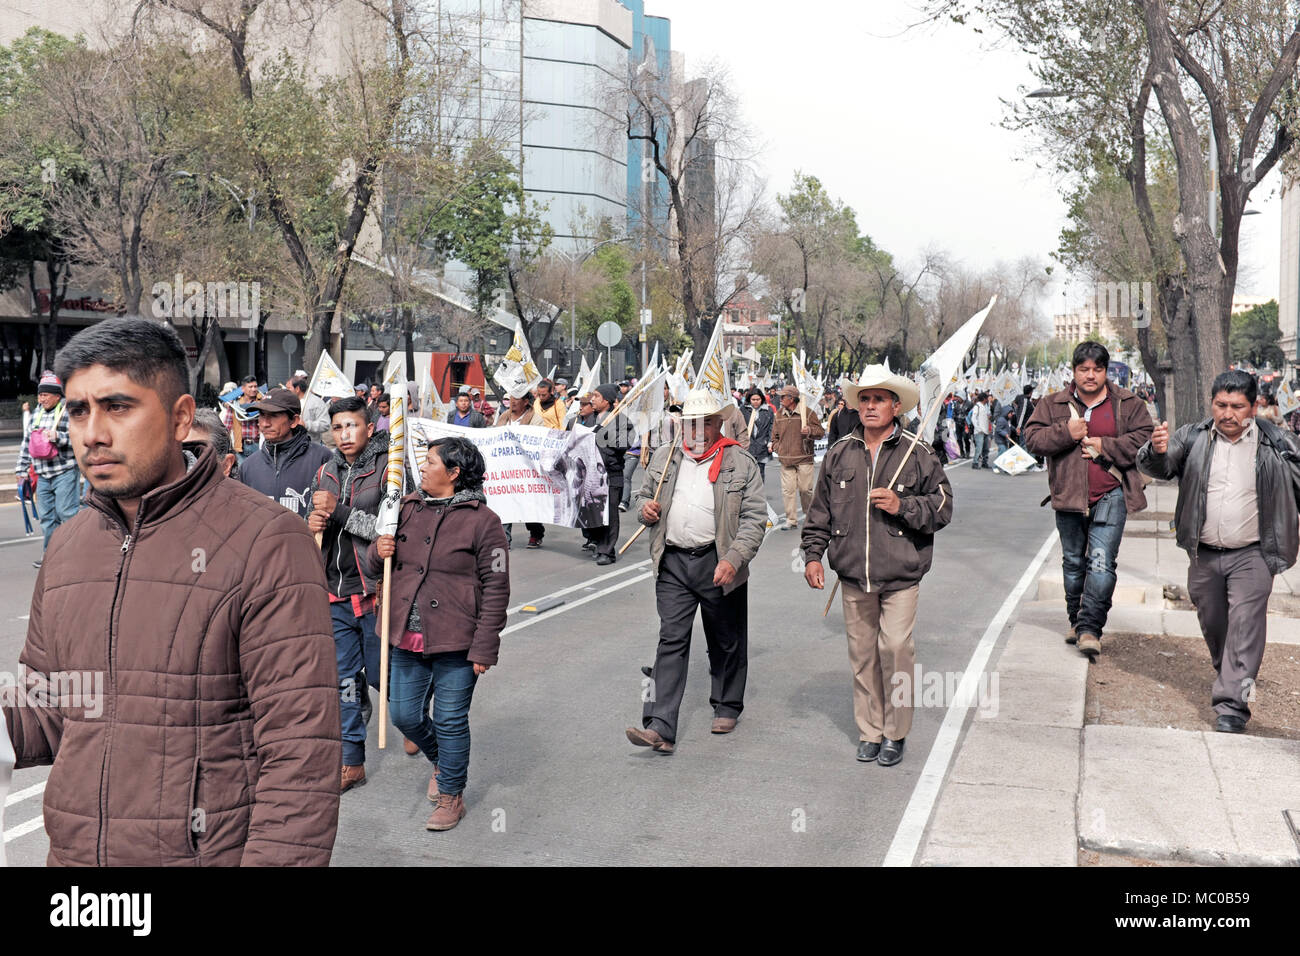 Provincial farmers and agriculture workers demonstrate against policies impacting their livelihoods along Paseo de la Reforma in Mexico City, Mexico. Stock Photo